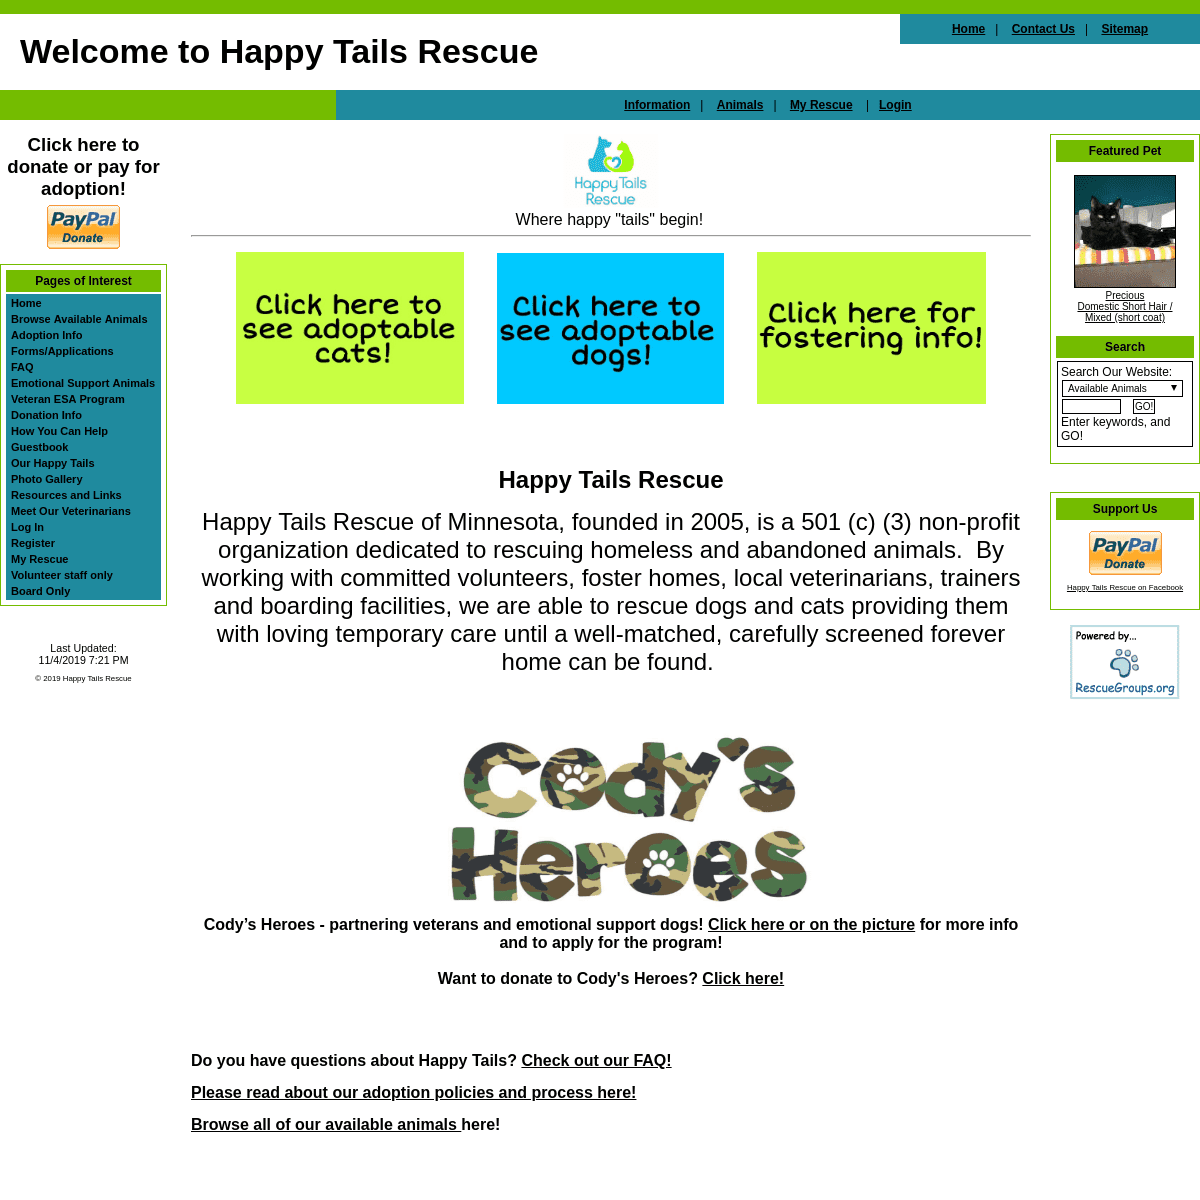 A complete backup of tailsrescue.org